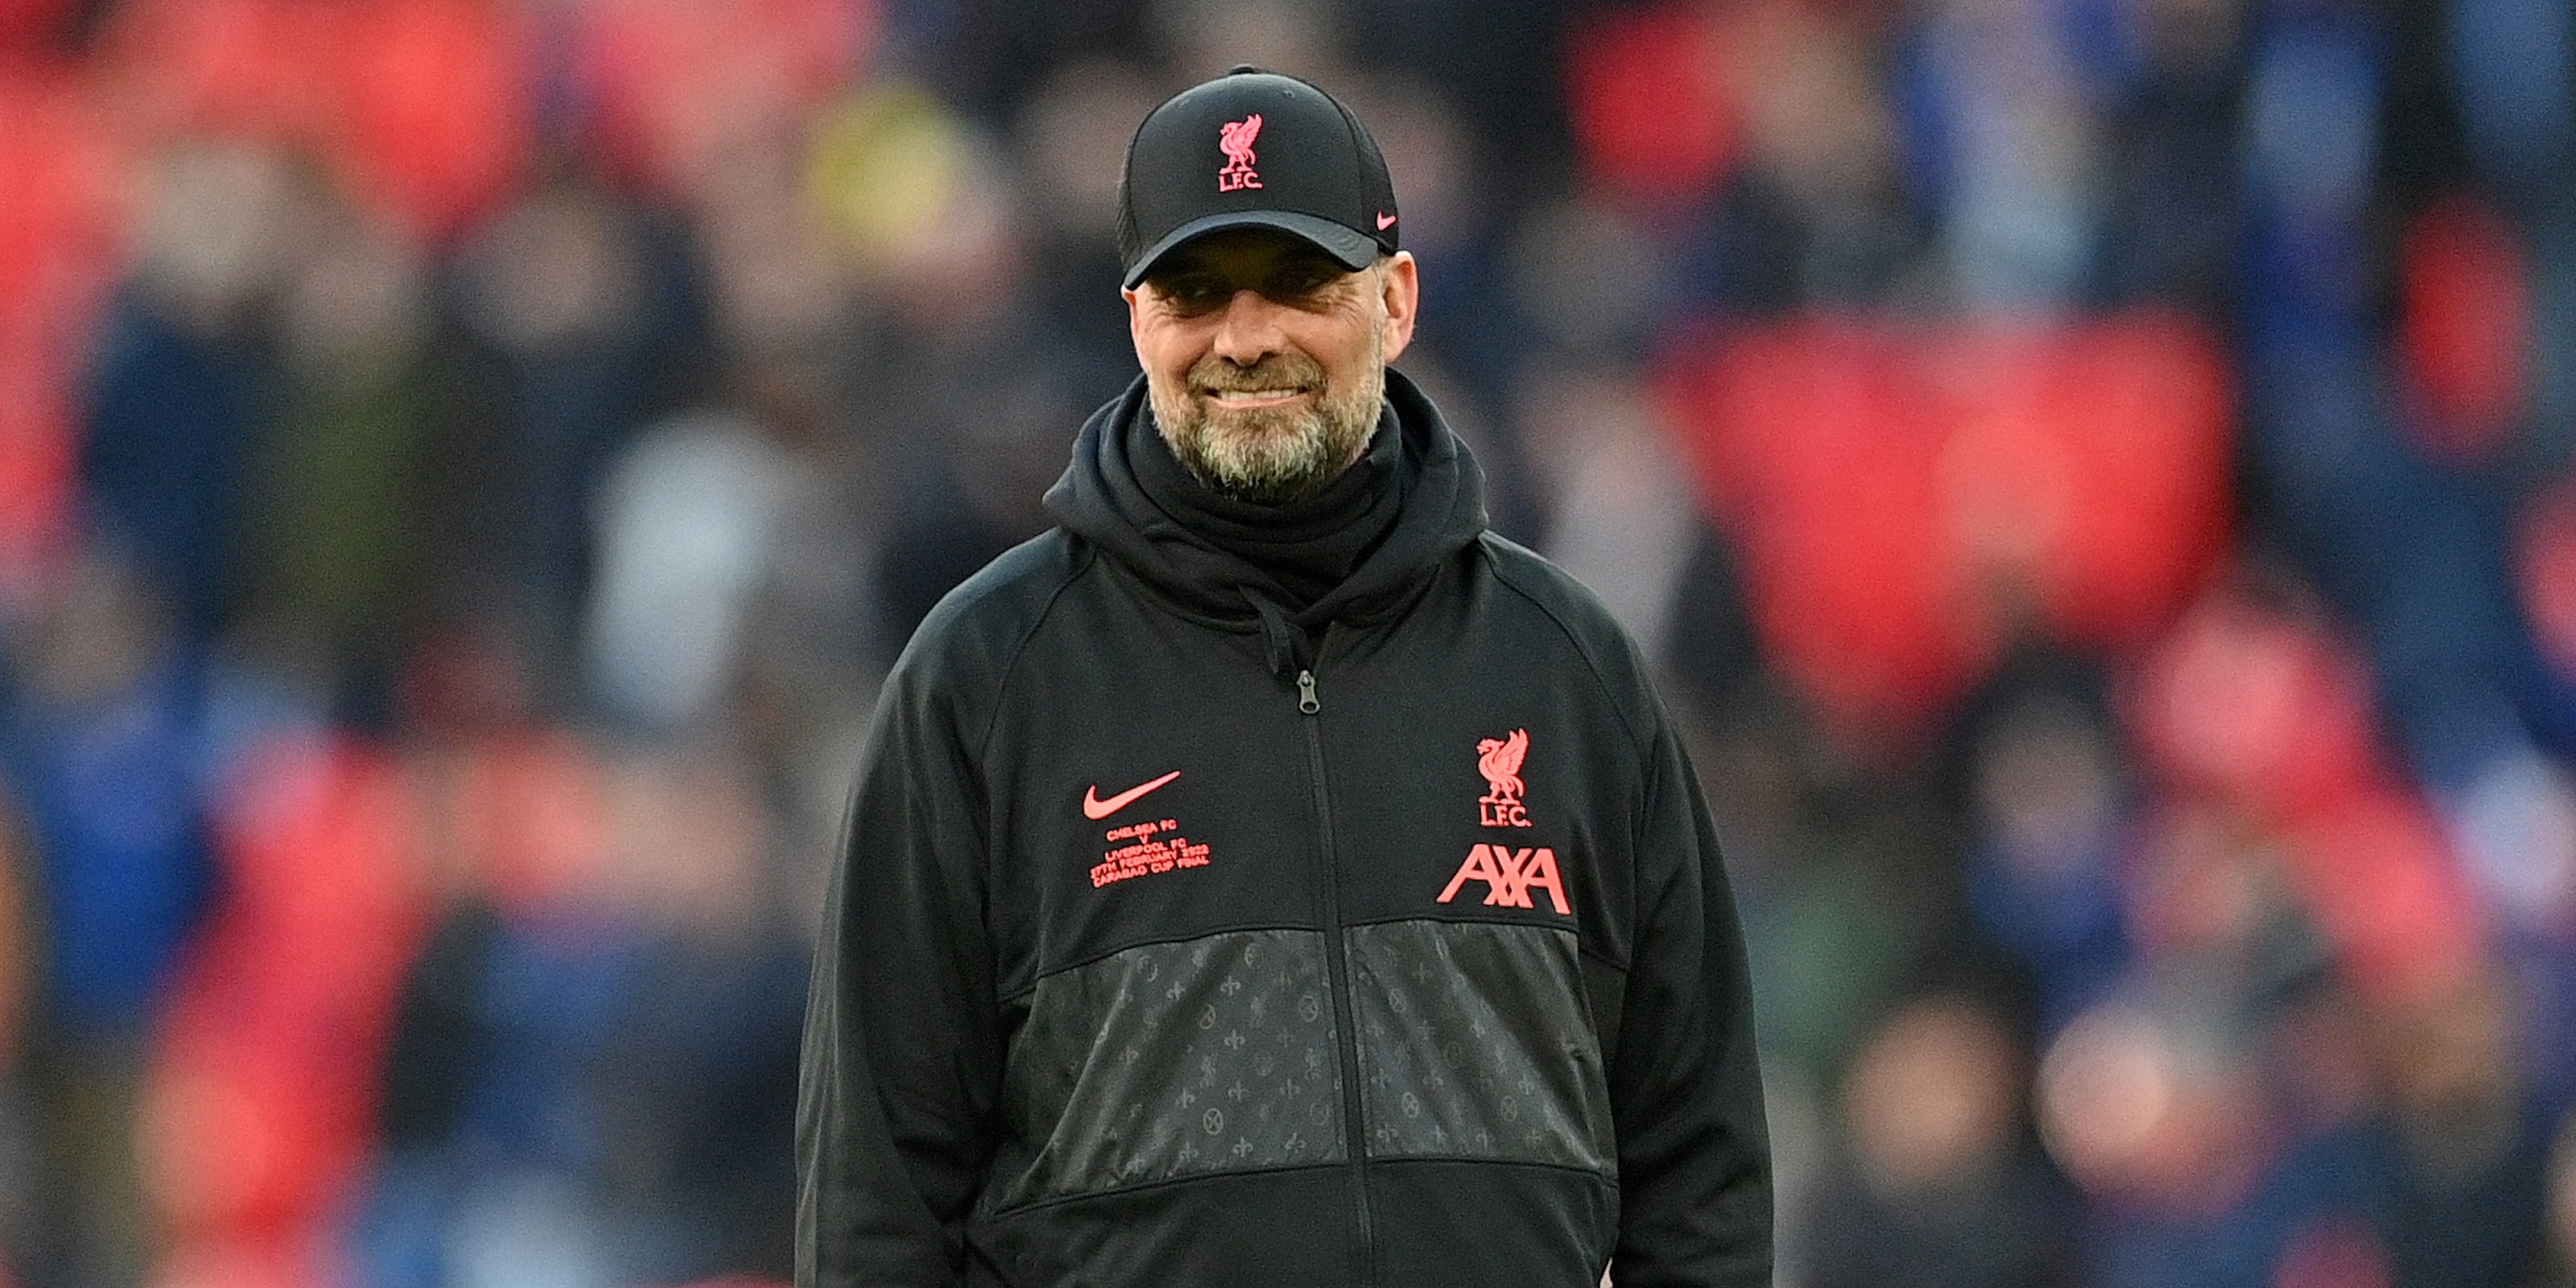 Klopp’s plan for Liverpool exit set to heavily contrast with Ferguson’s Man Utd departure in one clear way